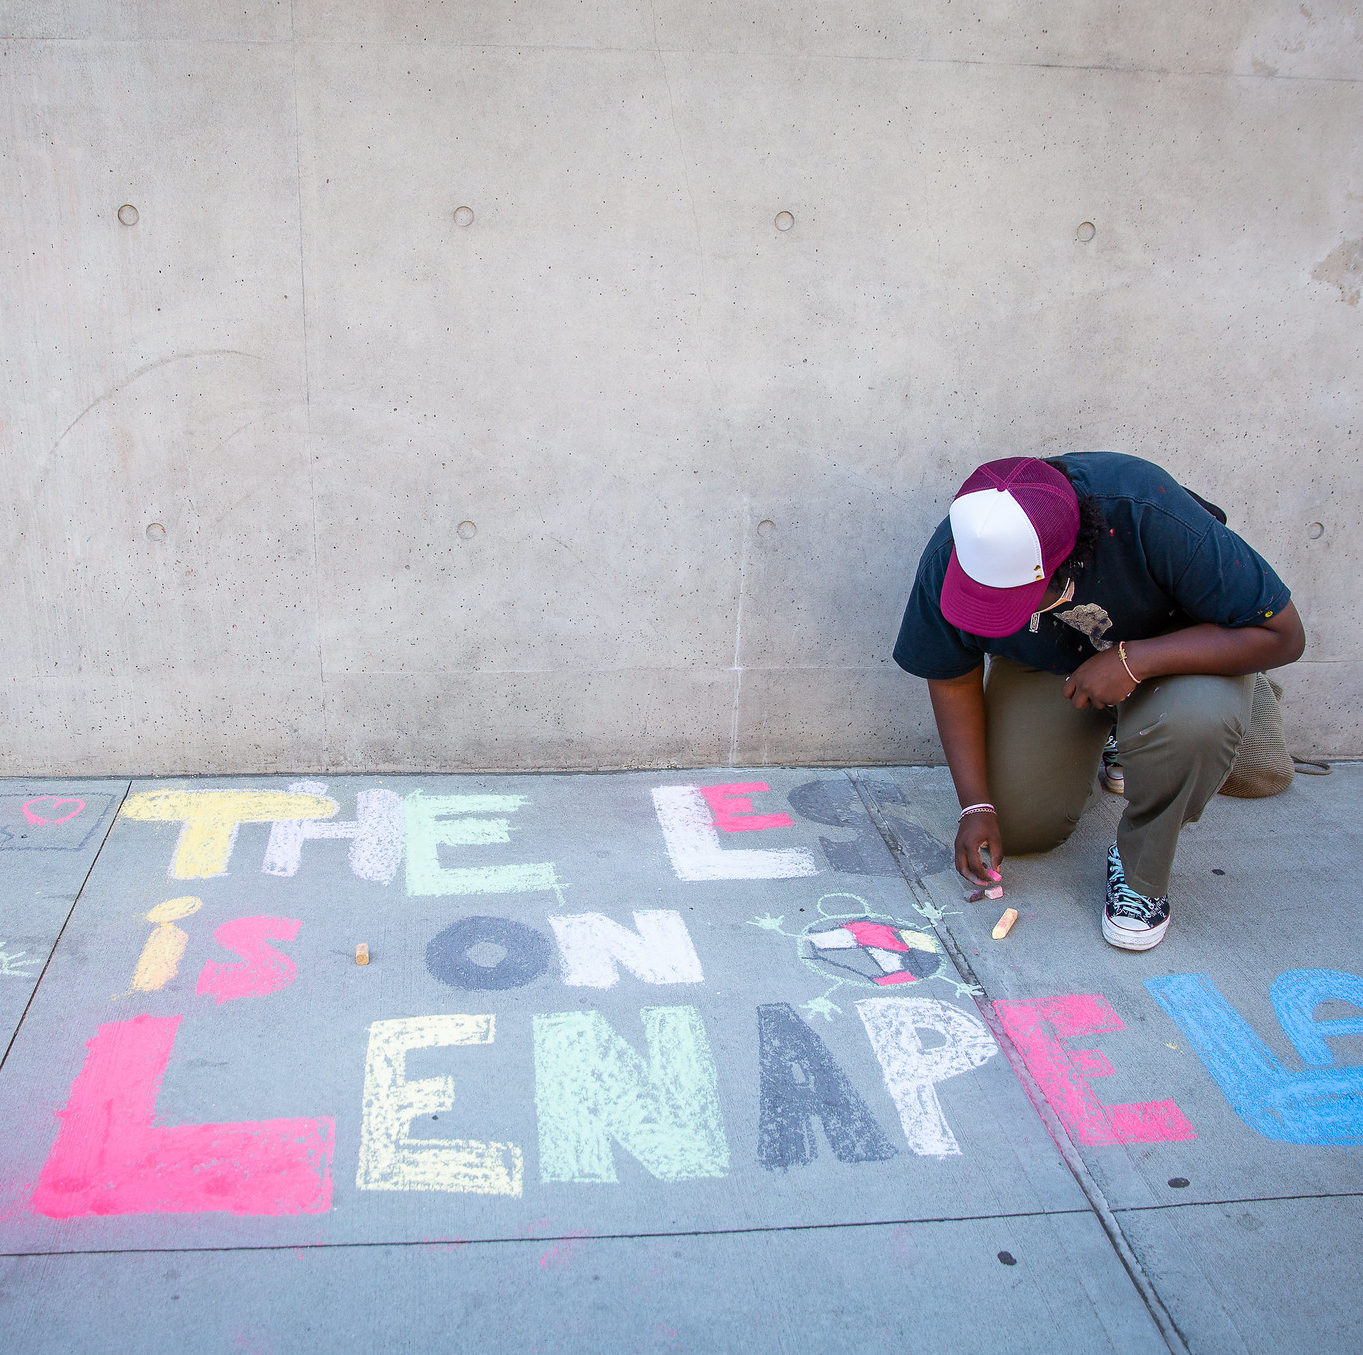 A sidewalk with a man kneeling and drawing in chalk "THE LES IS ON LENAPE LAND" 